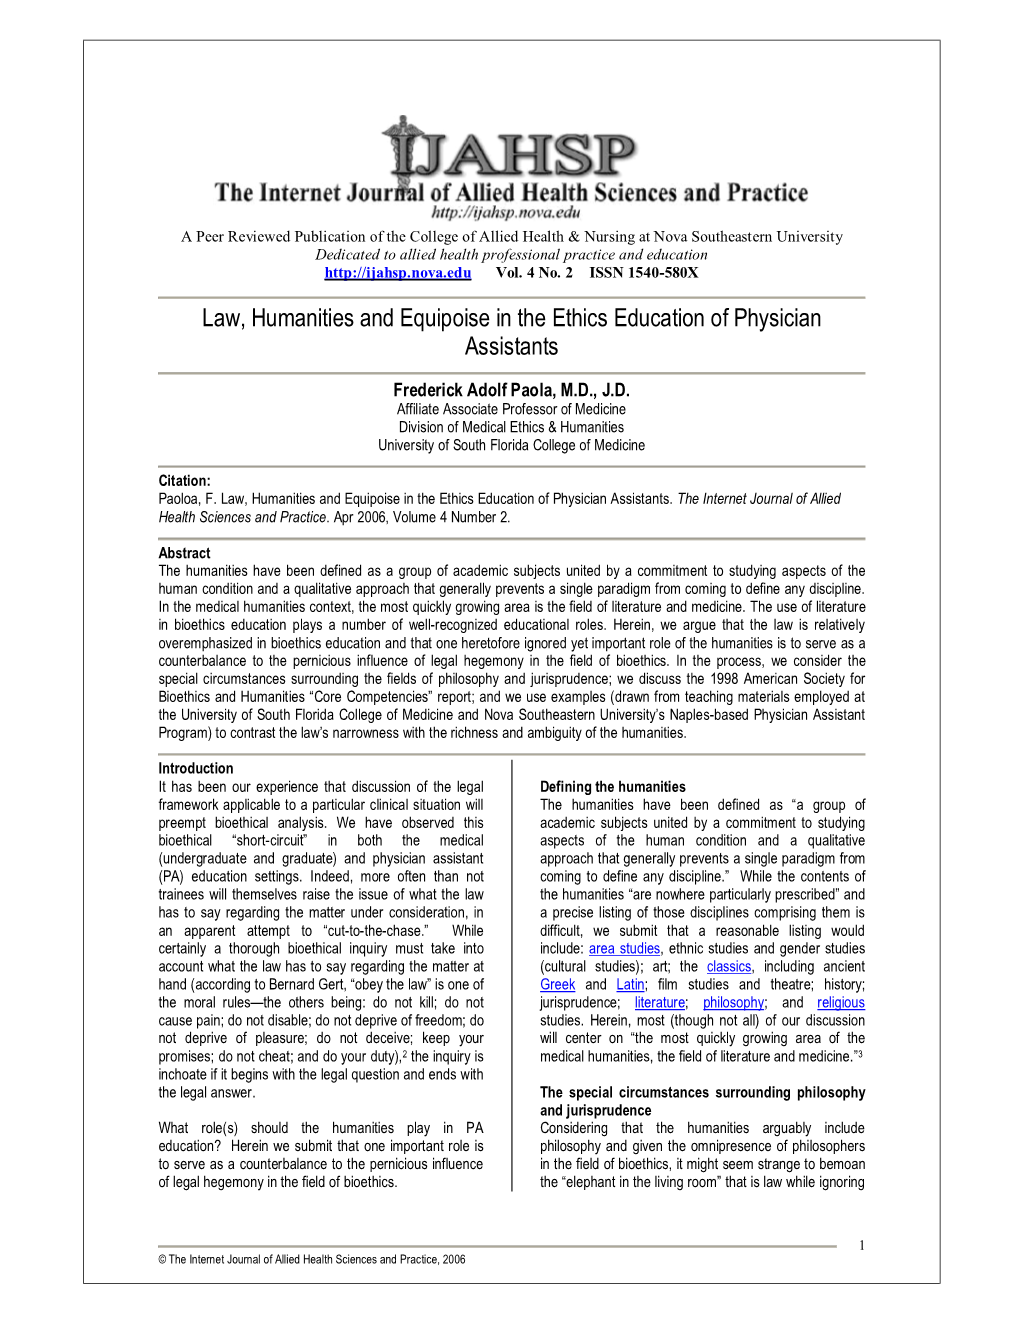 Law, Humanities and Equipoise in the Ethics Education of Physician Assistants